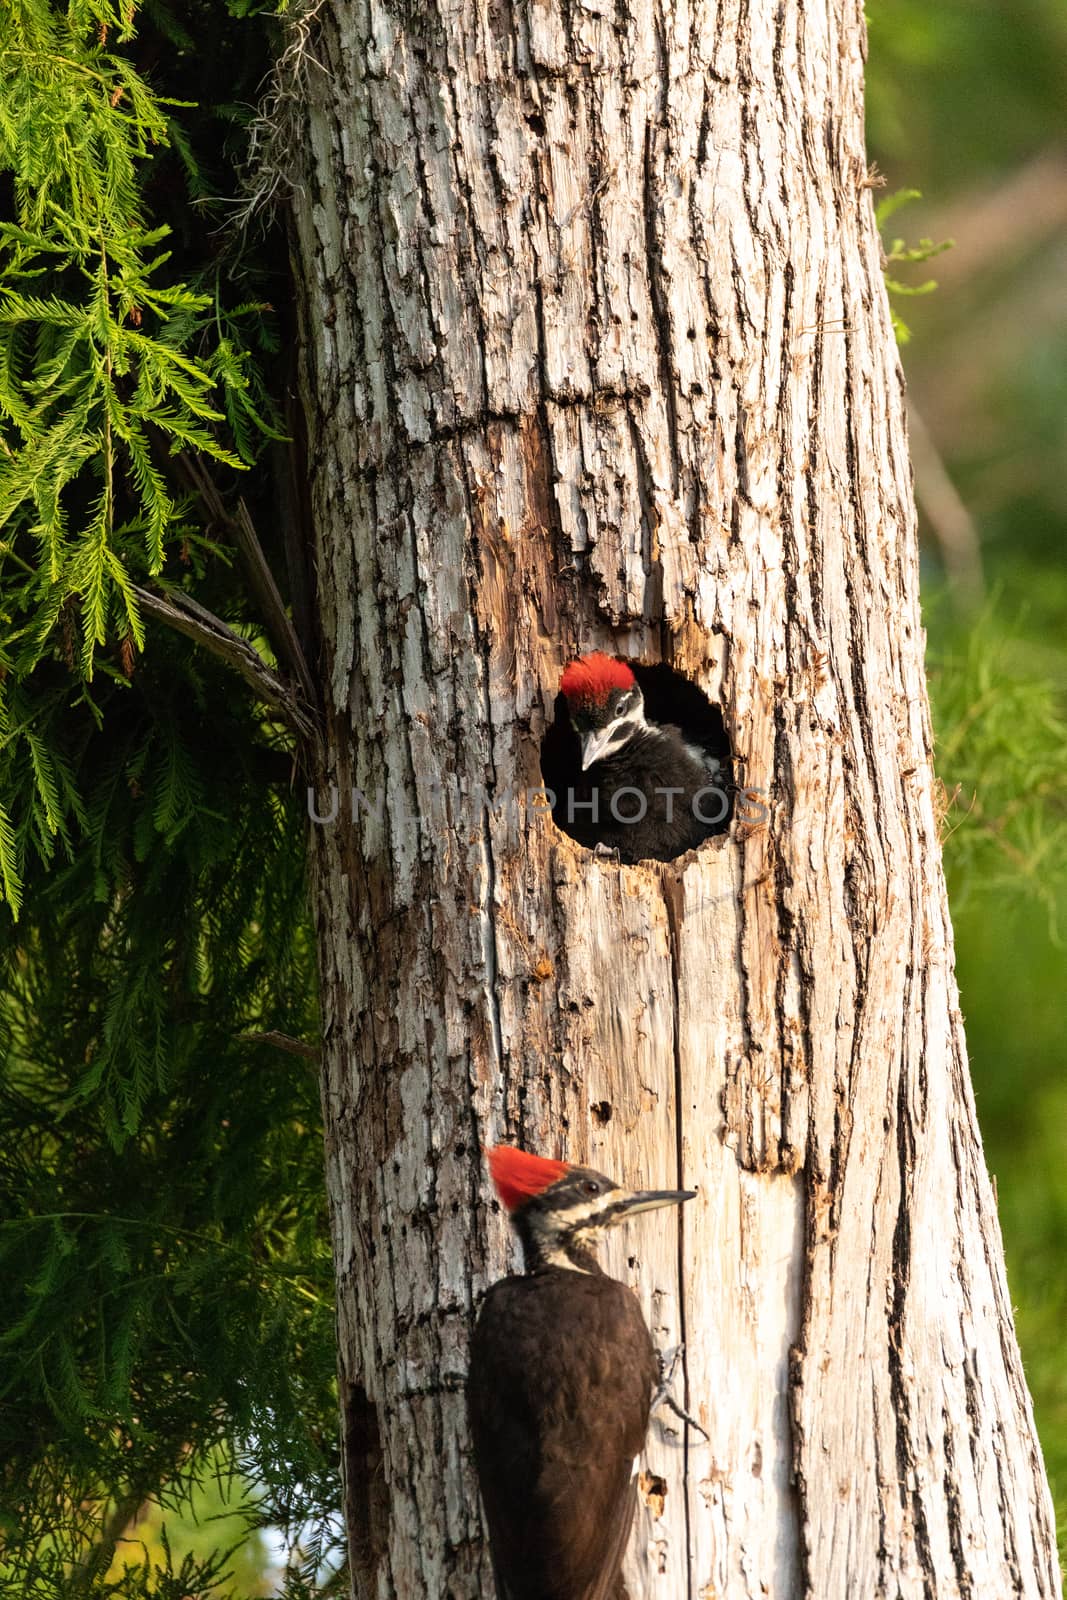 Adult pileated woodpecker Hylatomus pileatus feeds its chick as it peeks out of its nest hole in a Naples, Florida tree.